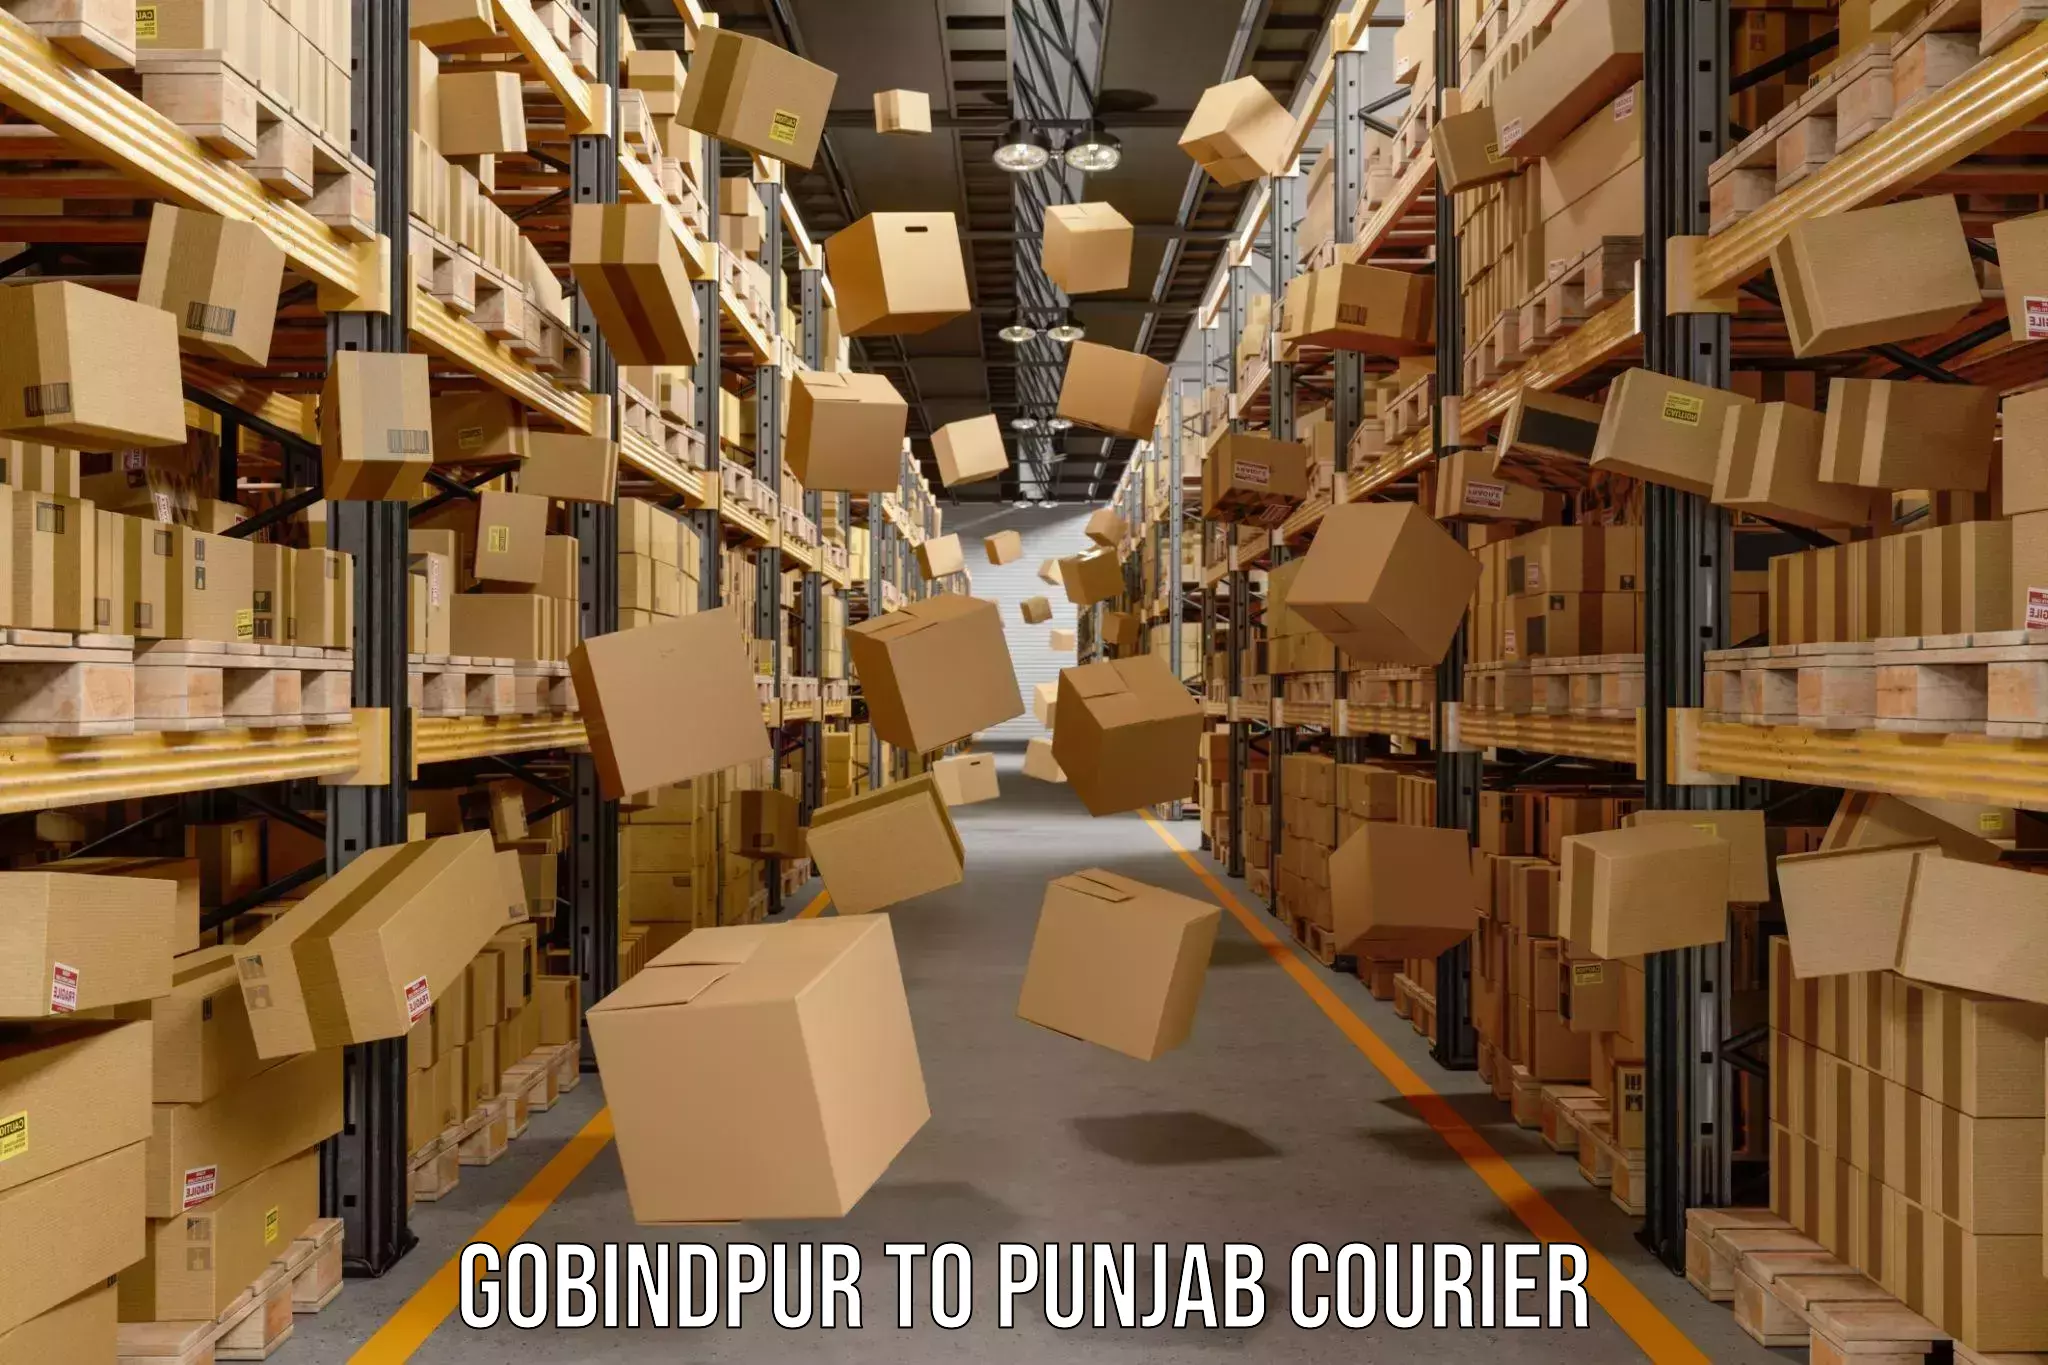 State-of-the-art courier technology Gobindpur to Firozpur